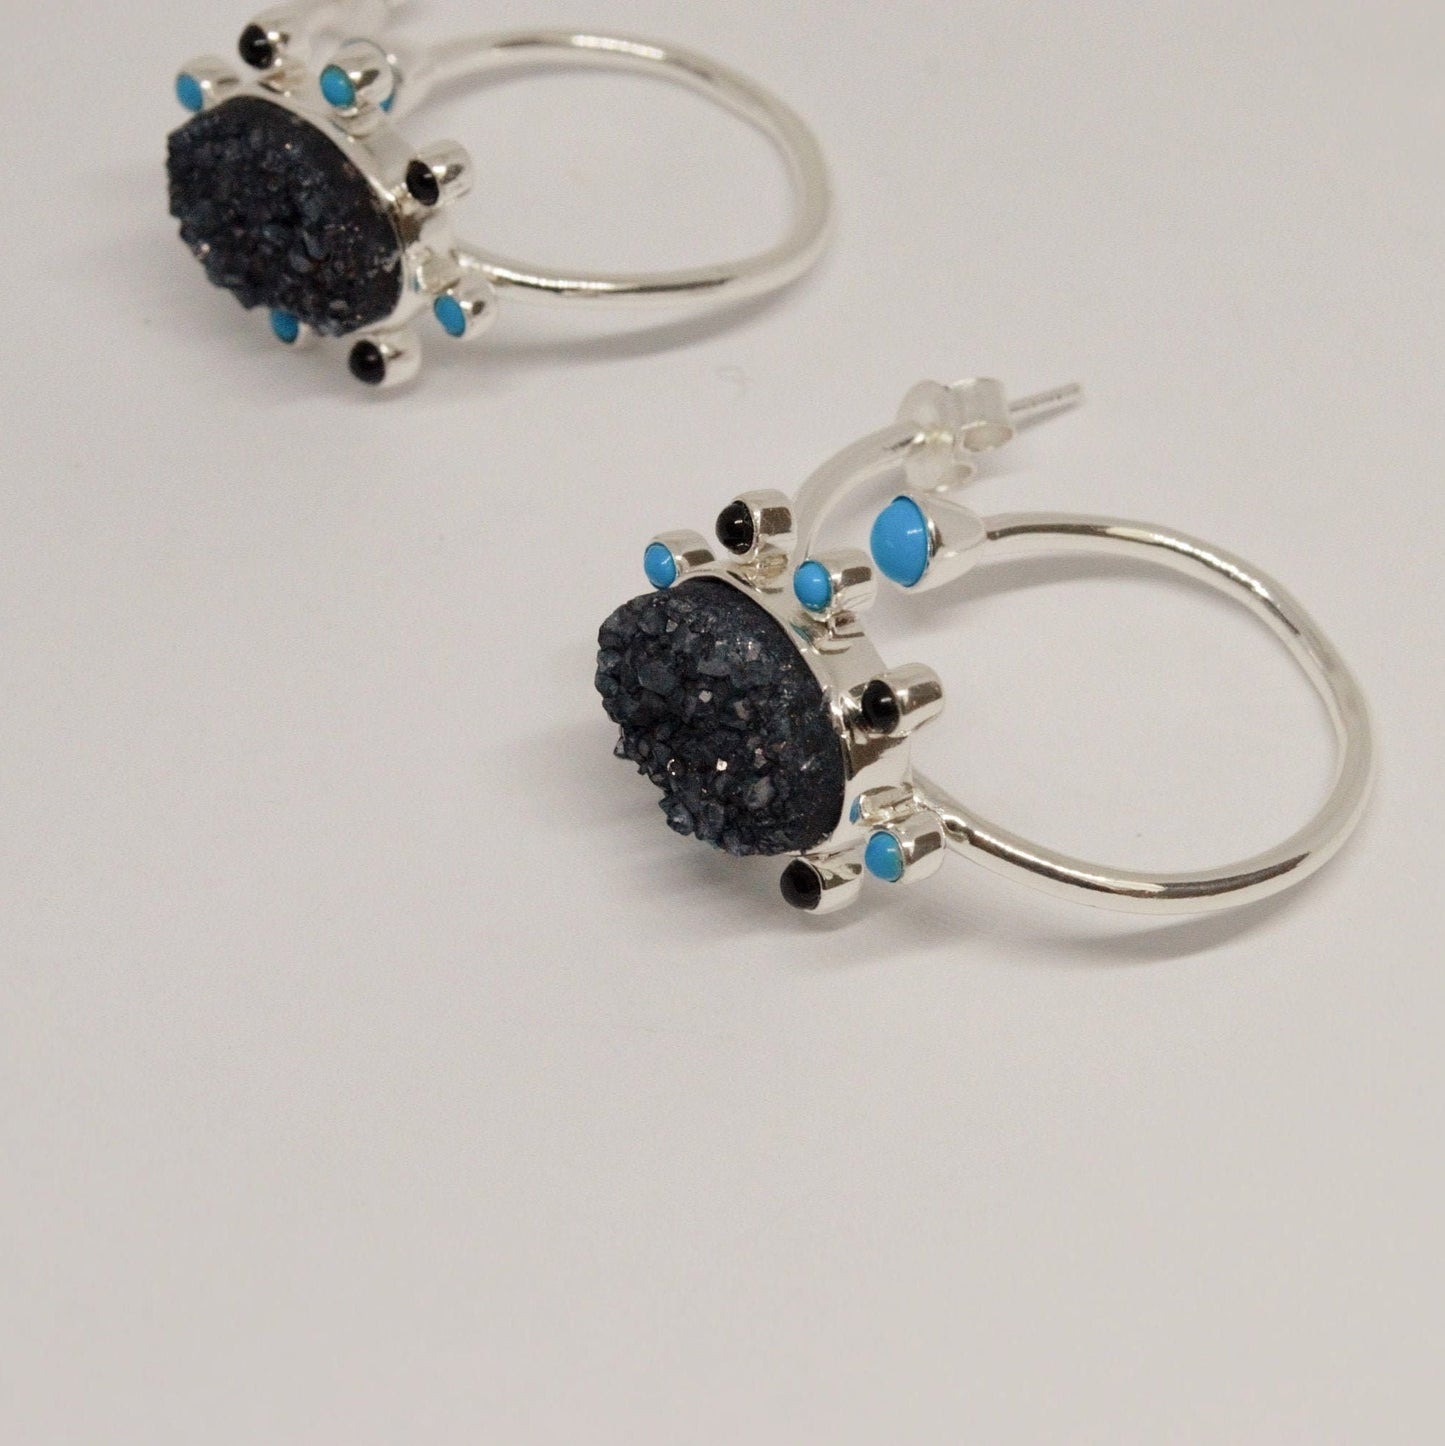 Black Onyx, Agate, Turquoise Earrings, Sterling Silver, Turquoise Birthstone Jewelry, Unique Druzy Gemstone Earrings